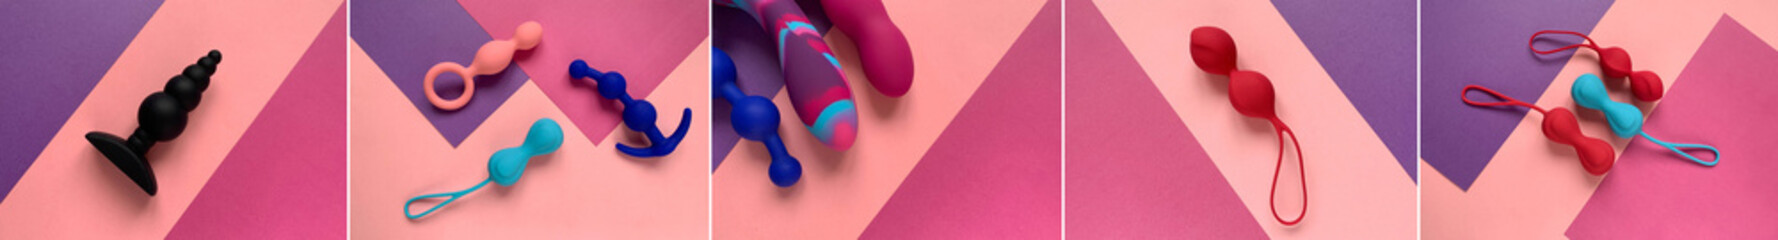 Collage with sex toys on colorful background. Vibrators,  jiggle balls and anal plugs on pink background. Useful for sex shop or adults